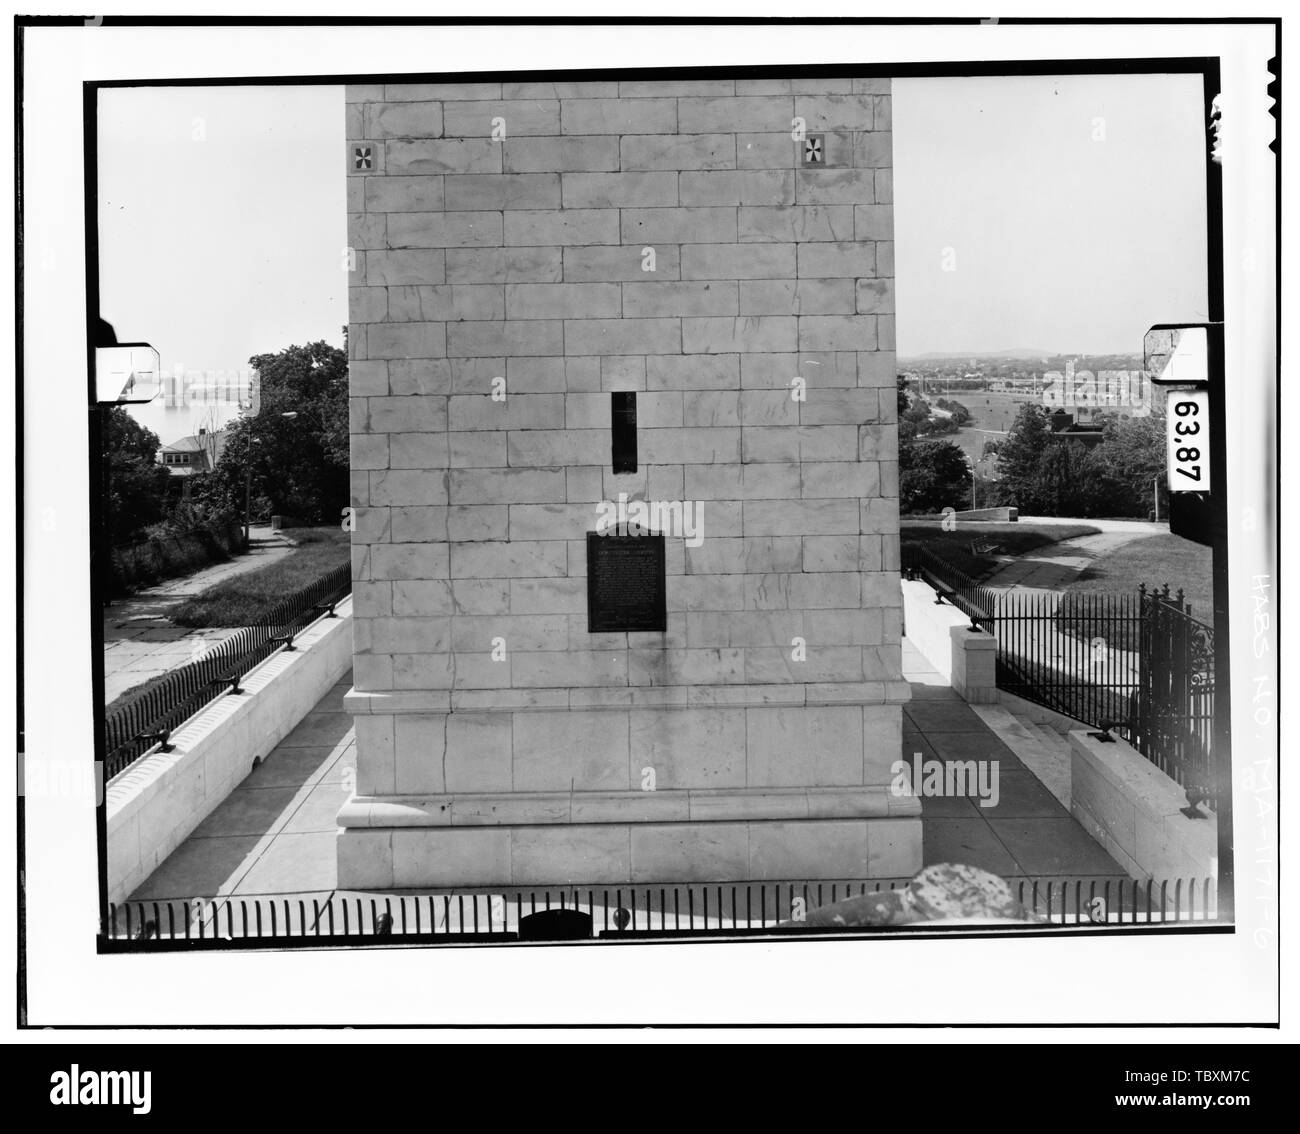 NORTH ELEVATION, LEVEL 1 Copy photograph of photogrammetric plate LCHABSGS11D1981N1R.  Dorchester Heights Monument, Thomas Park, Boston, Suffolk County, MA Peabody and Stearns Washington, George Burns, John A, field team Lawrence, Jeanne C, field team Alderson, Caroline R, field team Cronenberger, Richard J, project manager Graham, William J, field team Marsh, David T, field team Lowe, Jet, photographer Dennett, Muessig and Associates, Limited, photographer Taylor, Douglas R, delineator Schiller, Angela J, delineator Trumbull, Rebecca, delineator Stock Photo